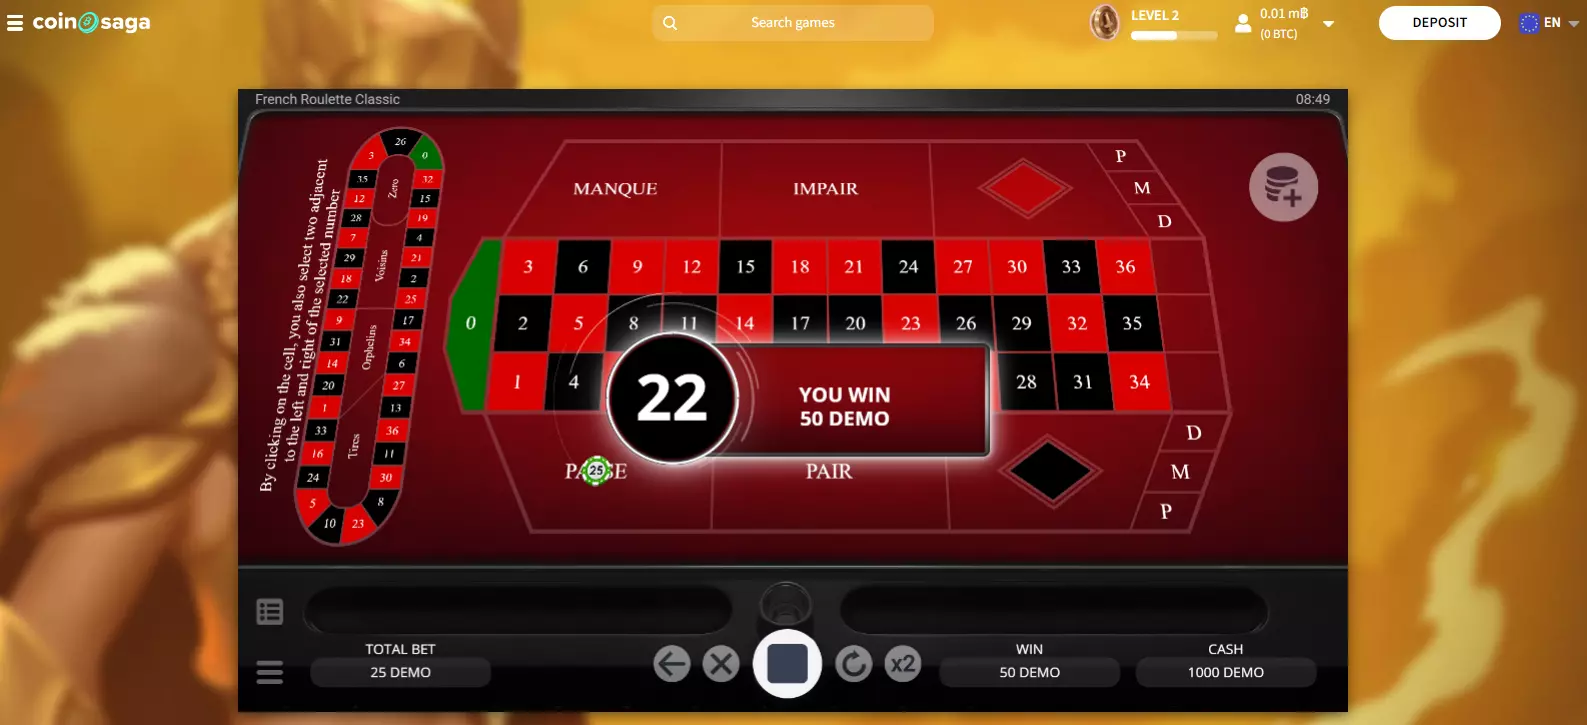 French Roulette Casino Game Bet